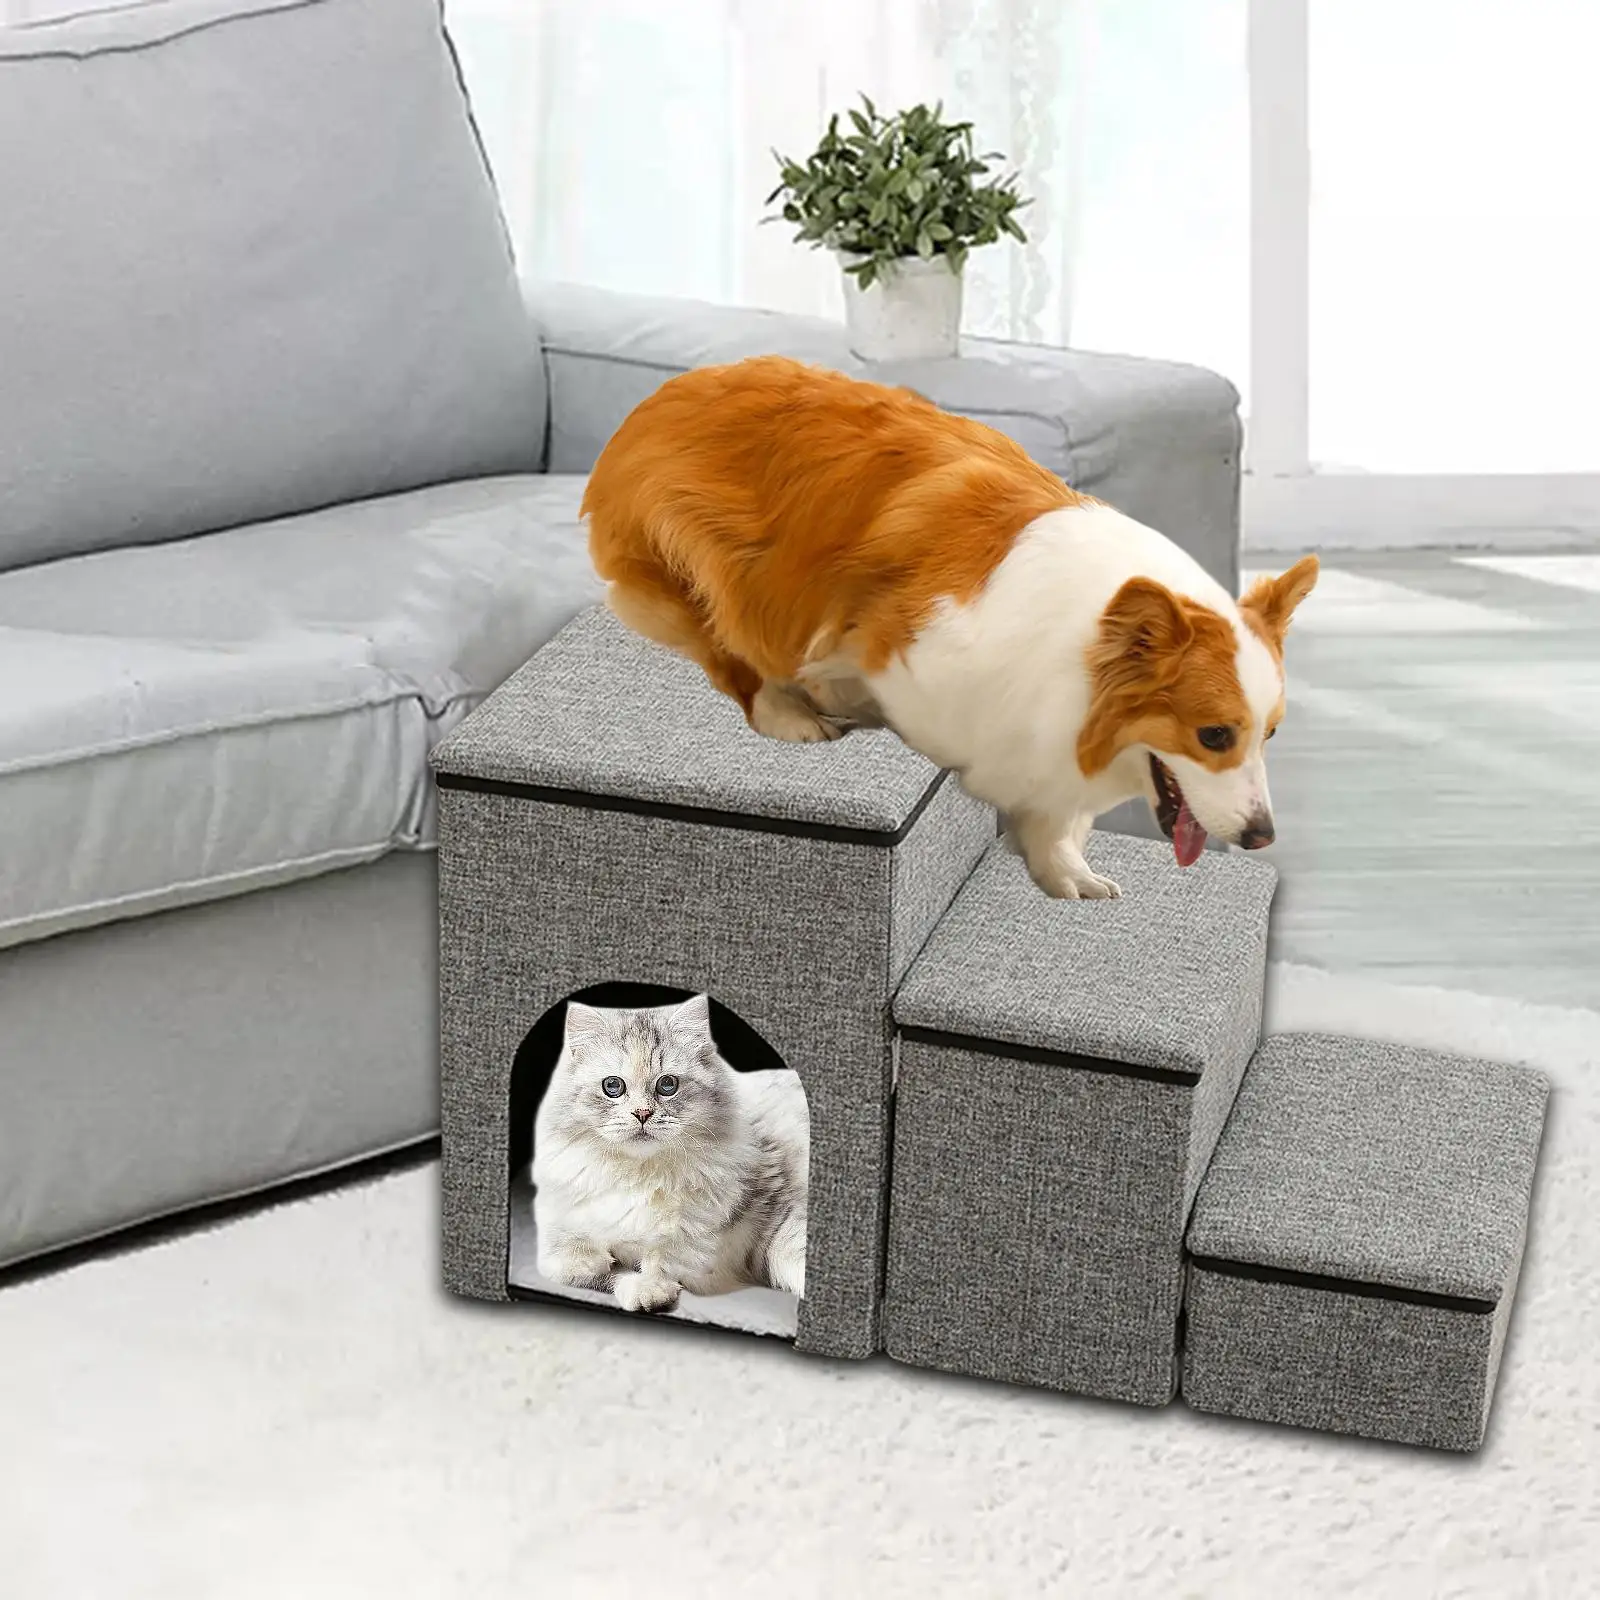 Folding Pet Stairs Cat Stairs Ladder with Storage Steps Dog Steps